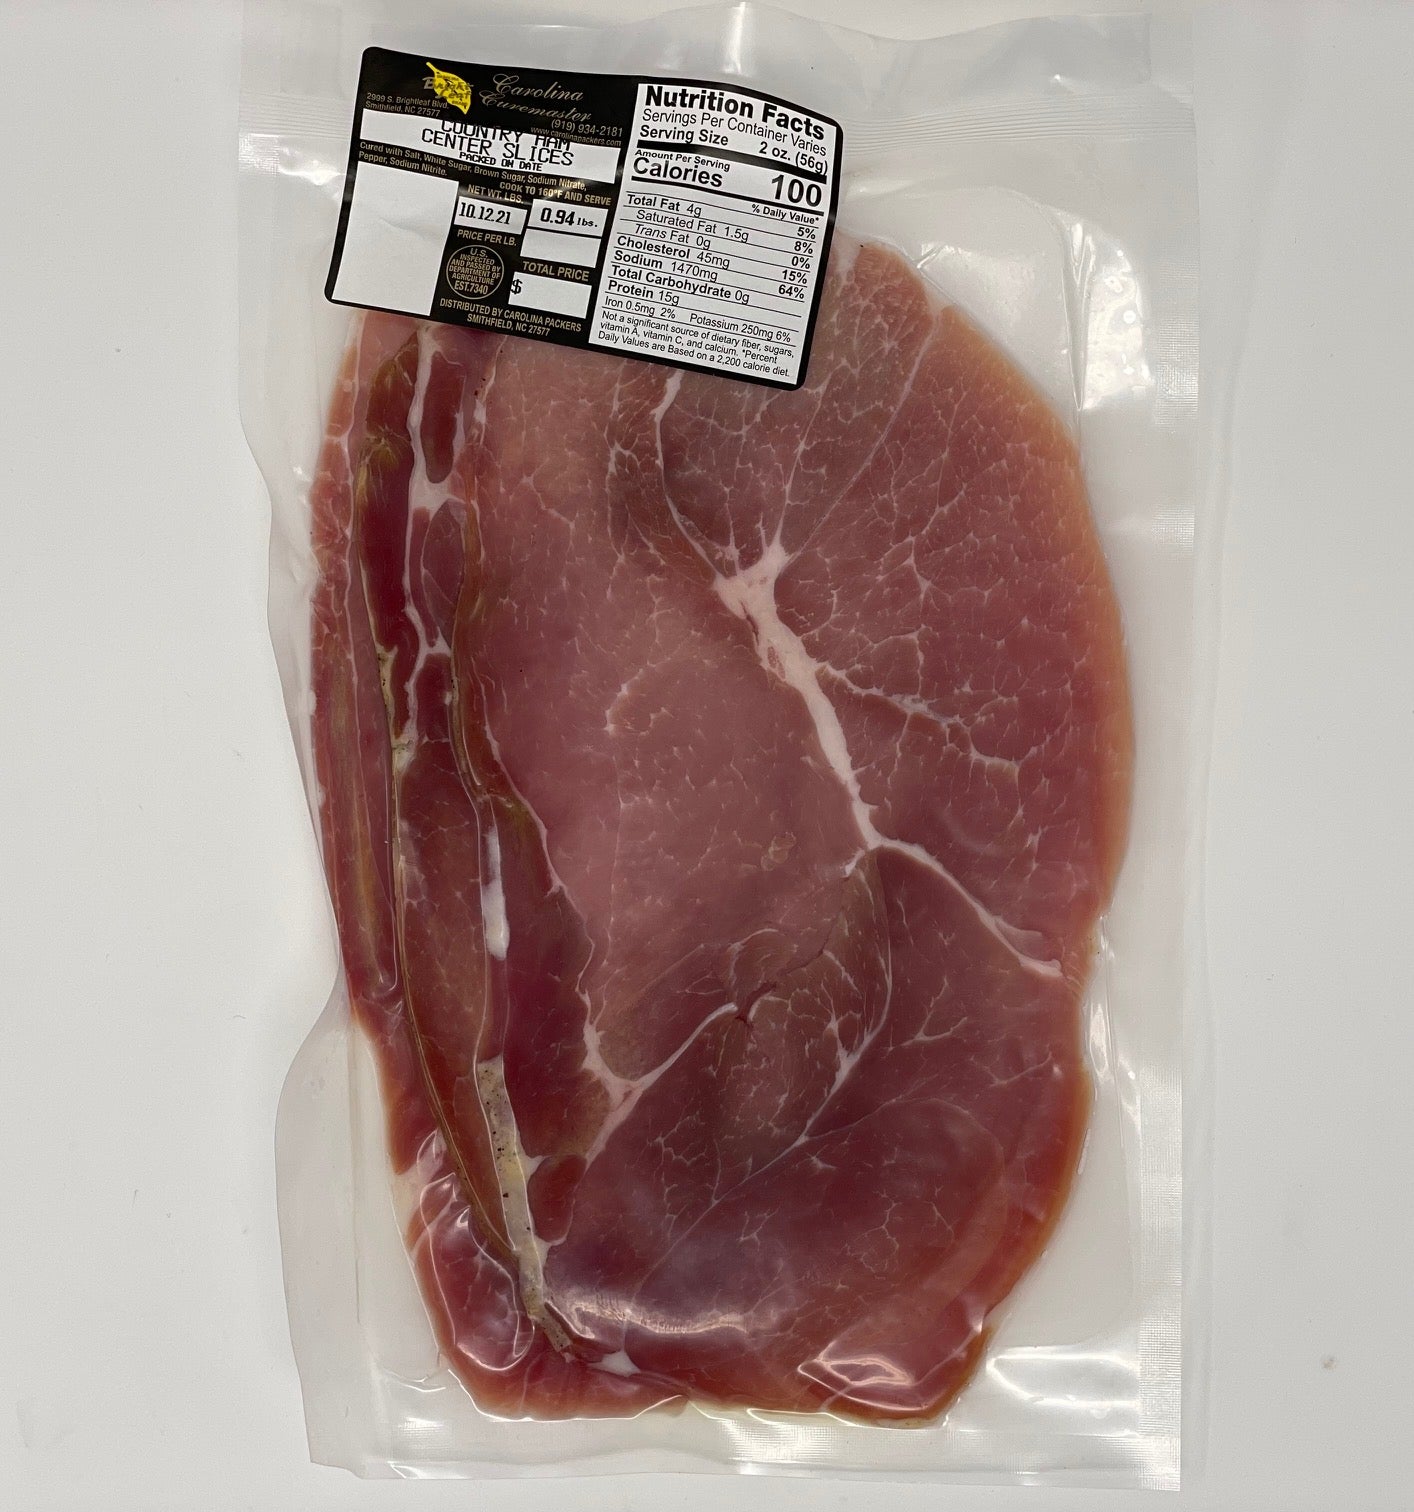 Carolina Curemaster Country Ham Center Cut Slices (Local Delivery)